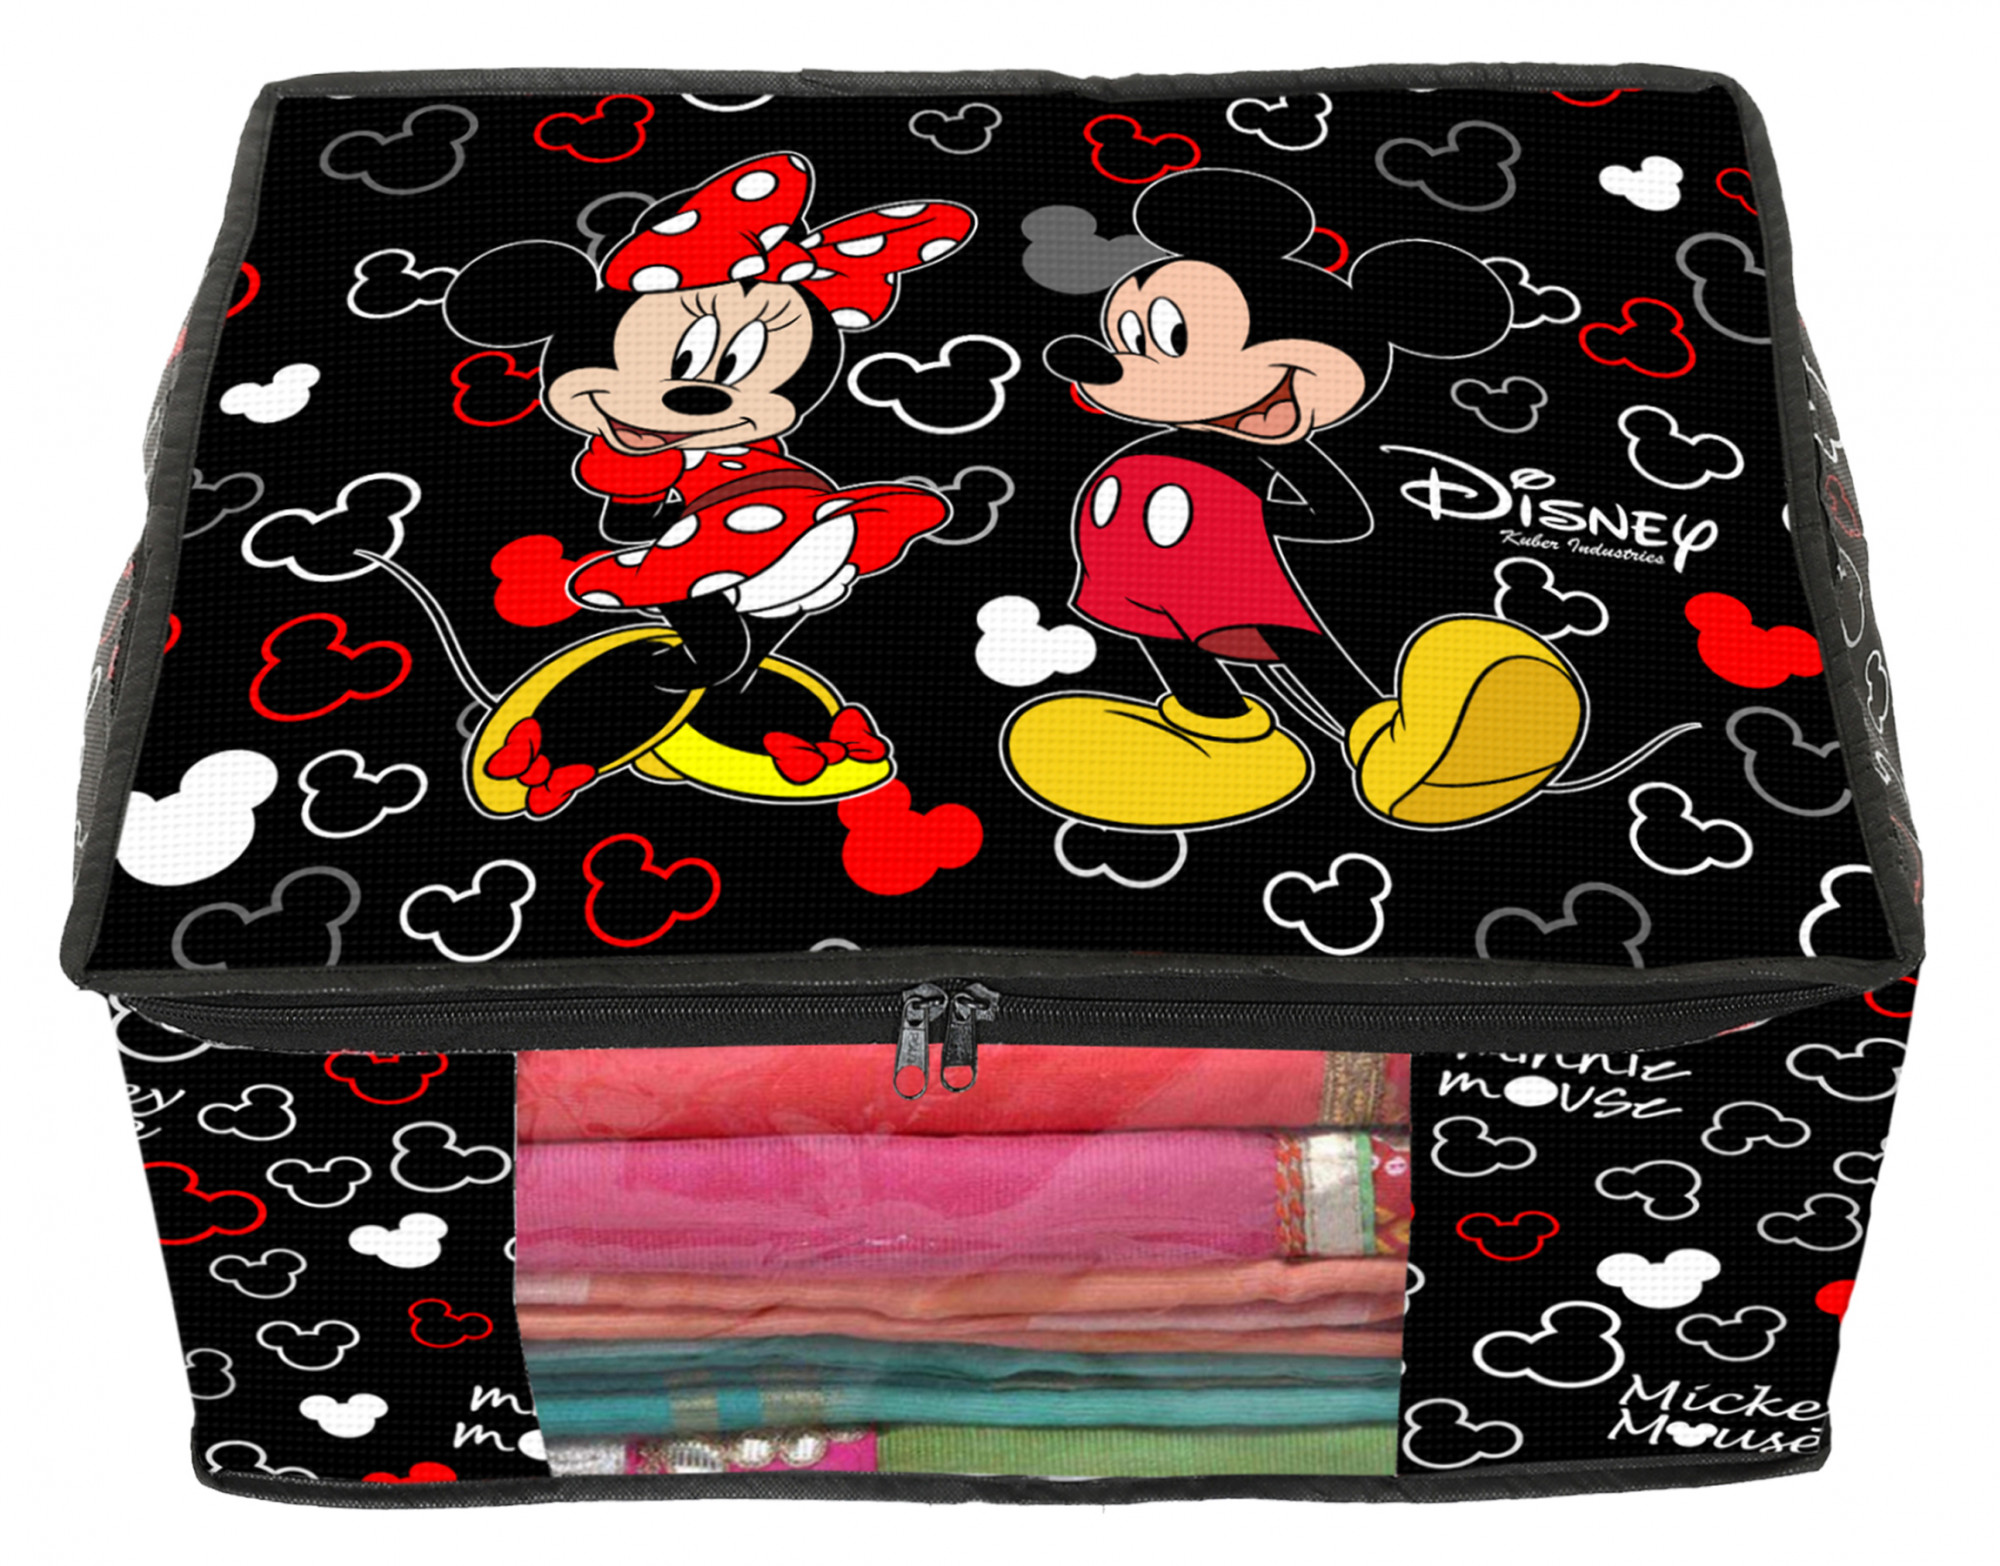 Kuber Industries Disney Mickey Print Non Woven Fabric Saree Cover/Clothes Organiser For Wardrobe Set with Transparent Window, Extra Large (Black) -HS_35_KUBMART18125